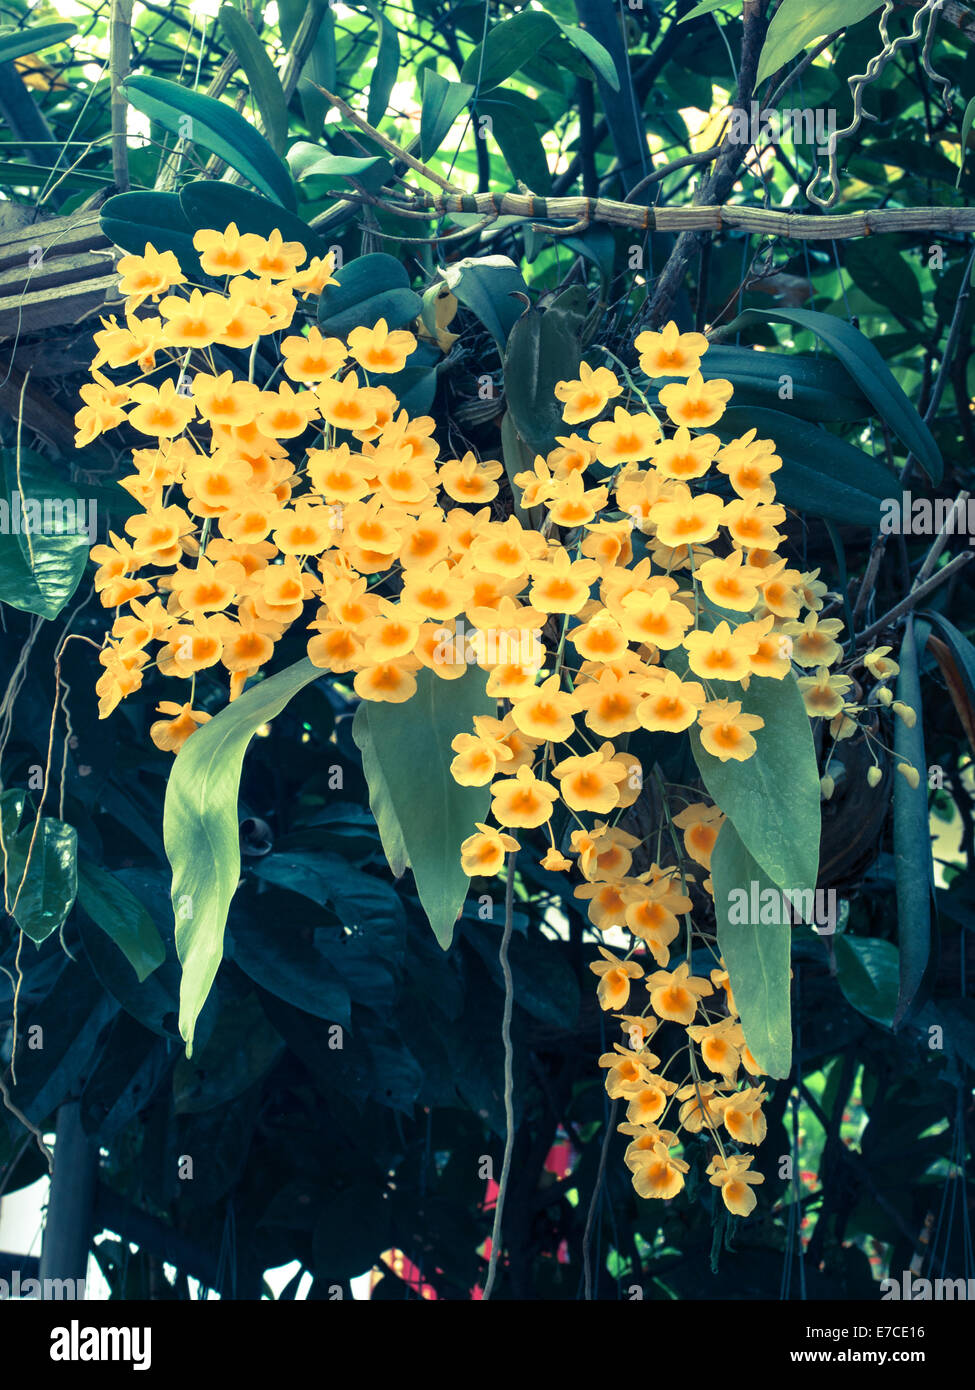 Colorful Orchid Species Yellow Dendrobium lindleyi flower; Filtered image:cross processed vintage effect. Stock Photo